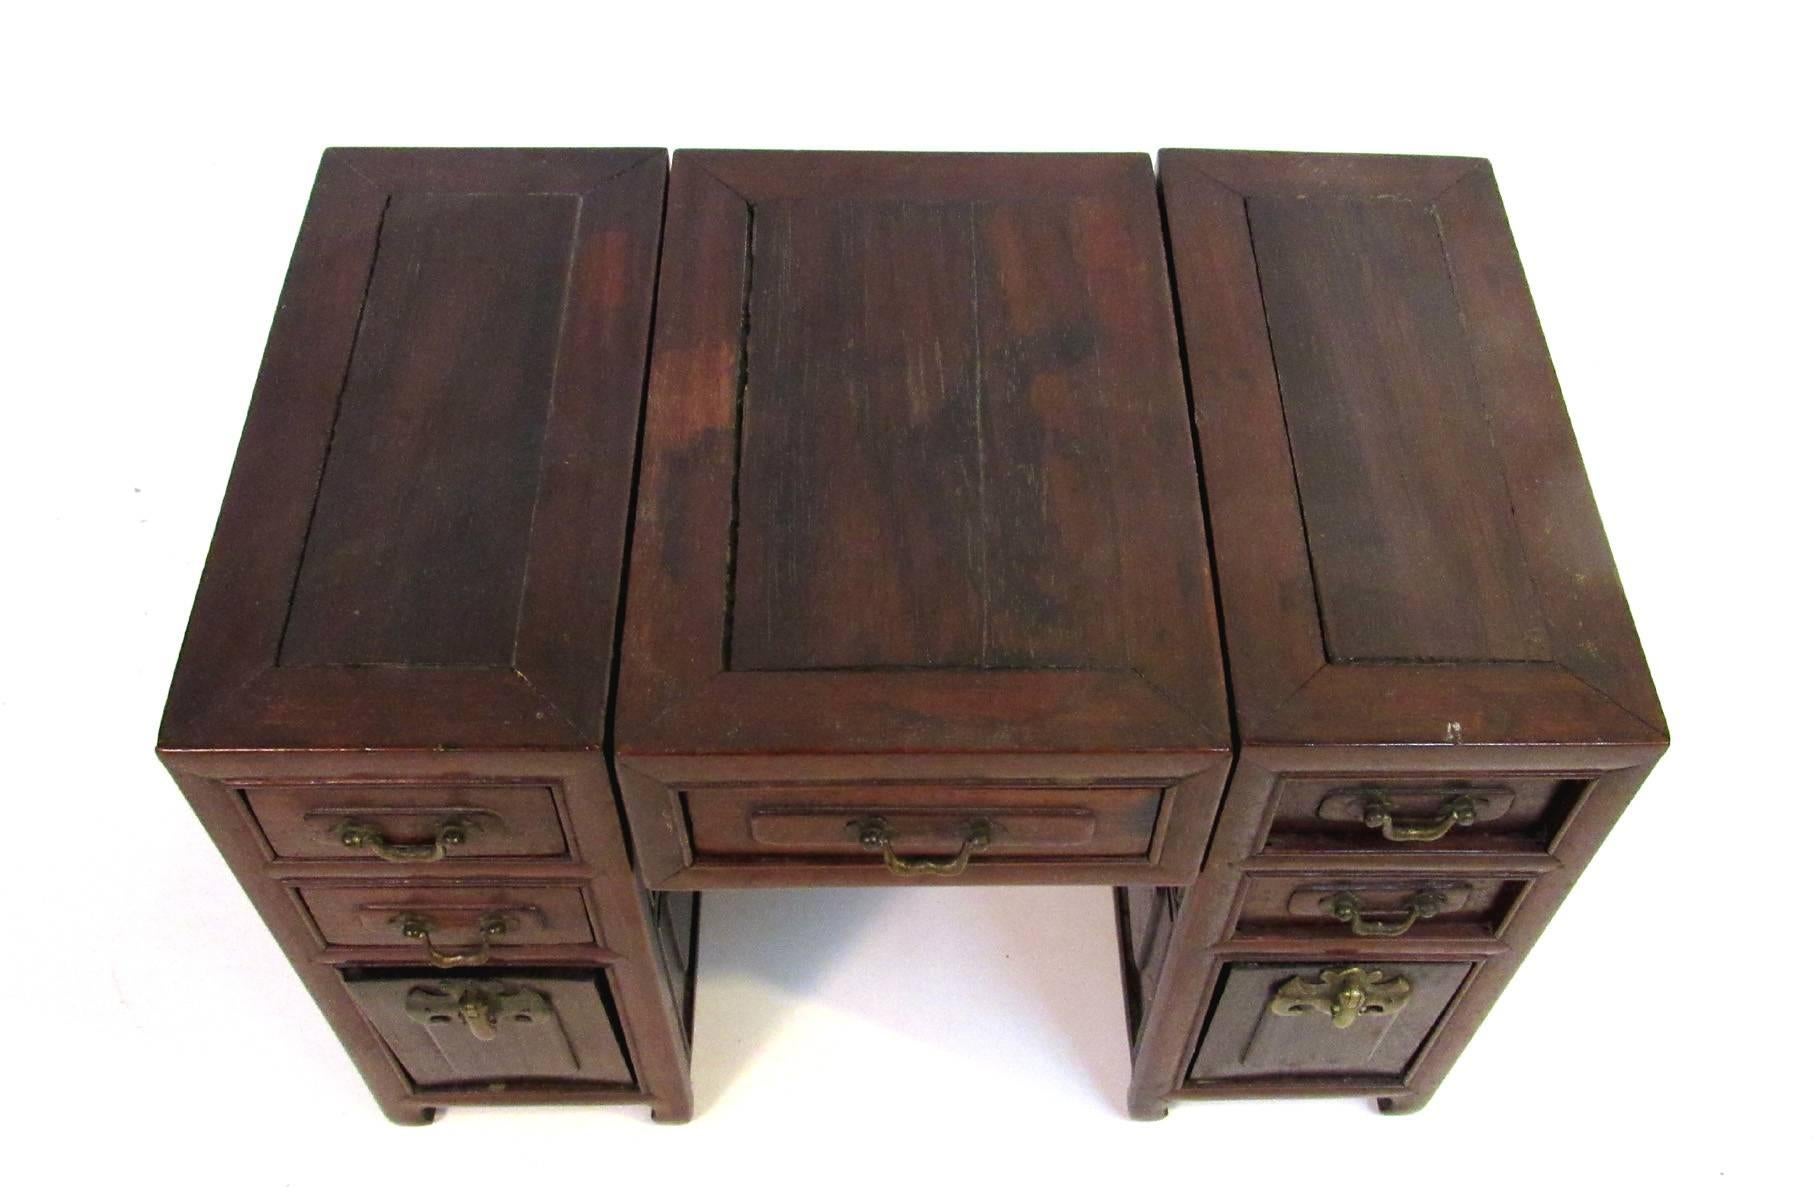 Early 19th Century hand-made miniature desk made from blackwood, in three sections, each pedestal with two drawers and a lift out panel, center section with single drawer, all drawers with brass handles, the panels with bat form locks. Extremely